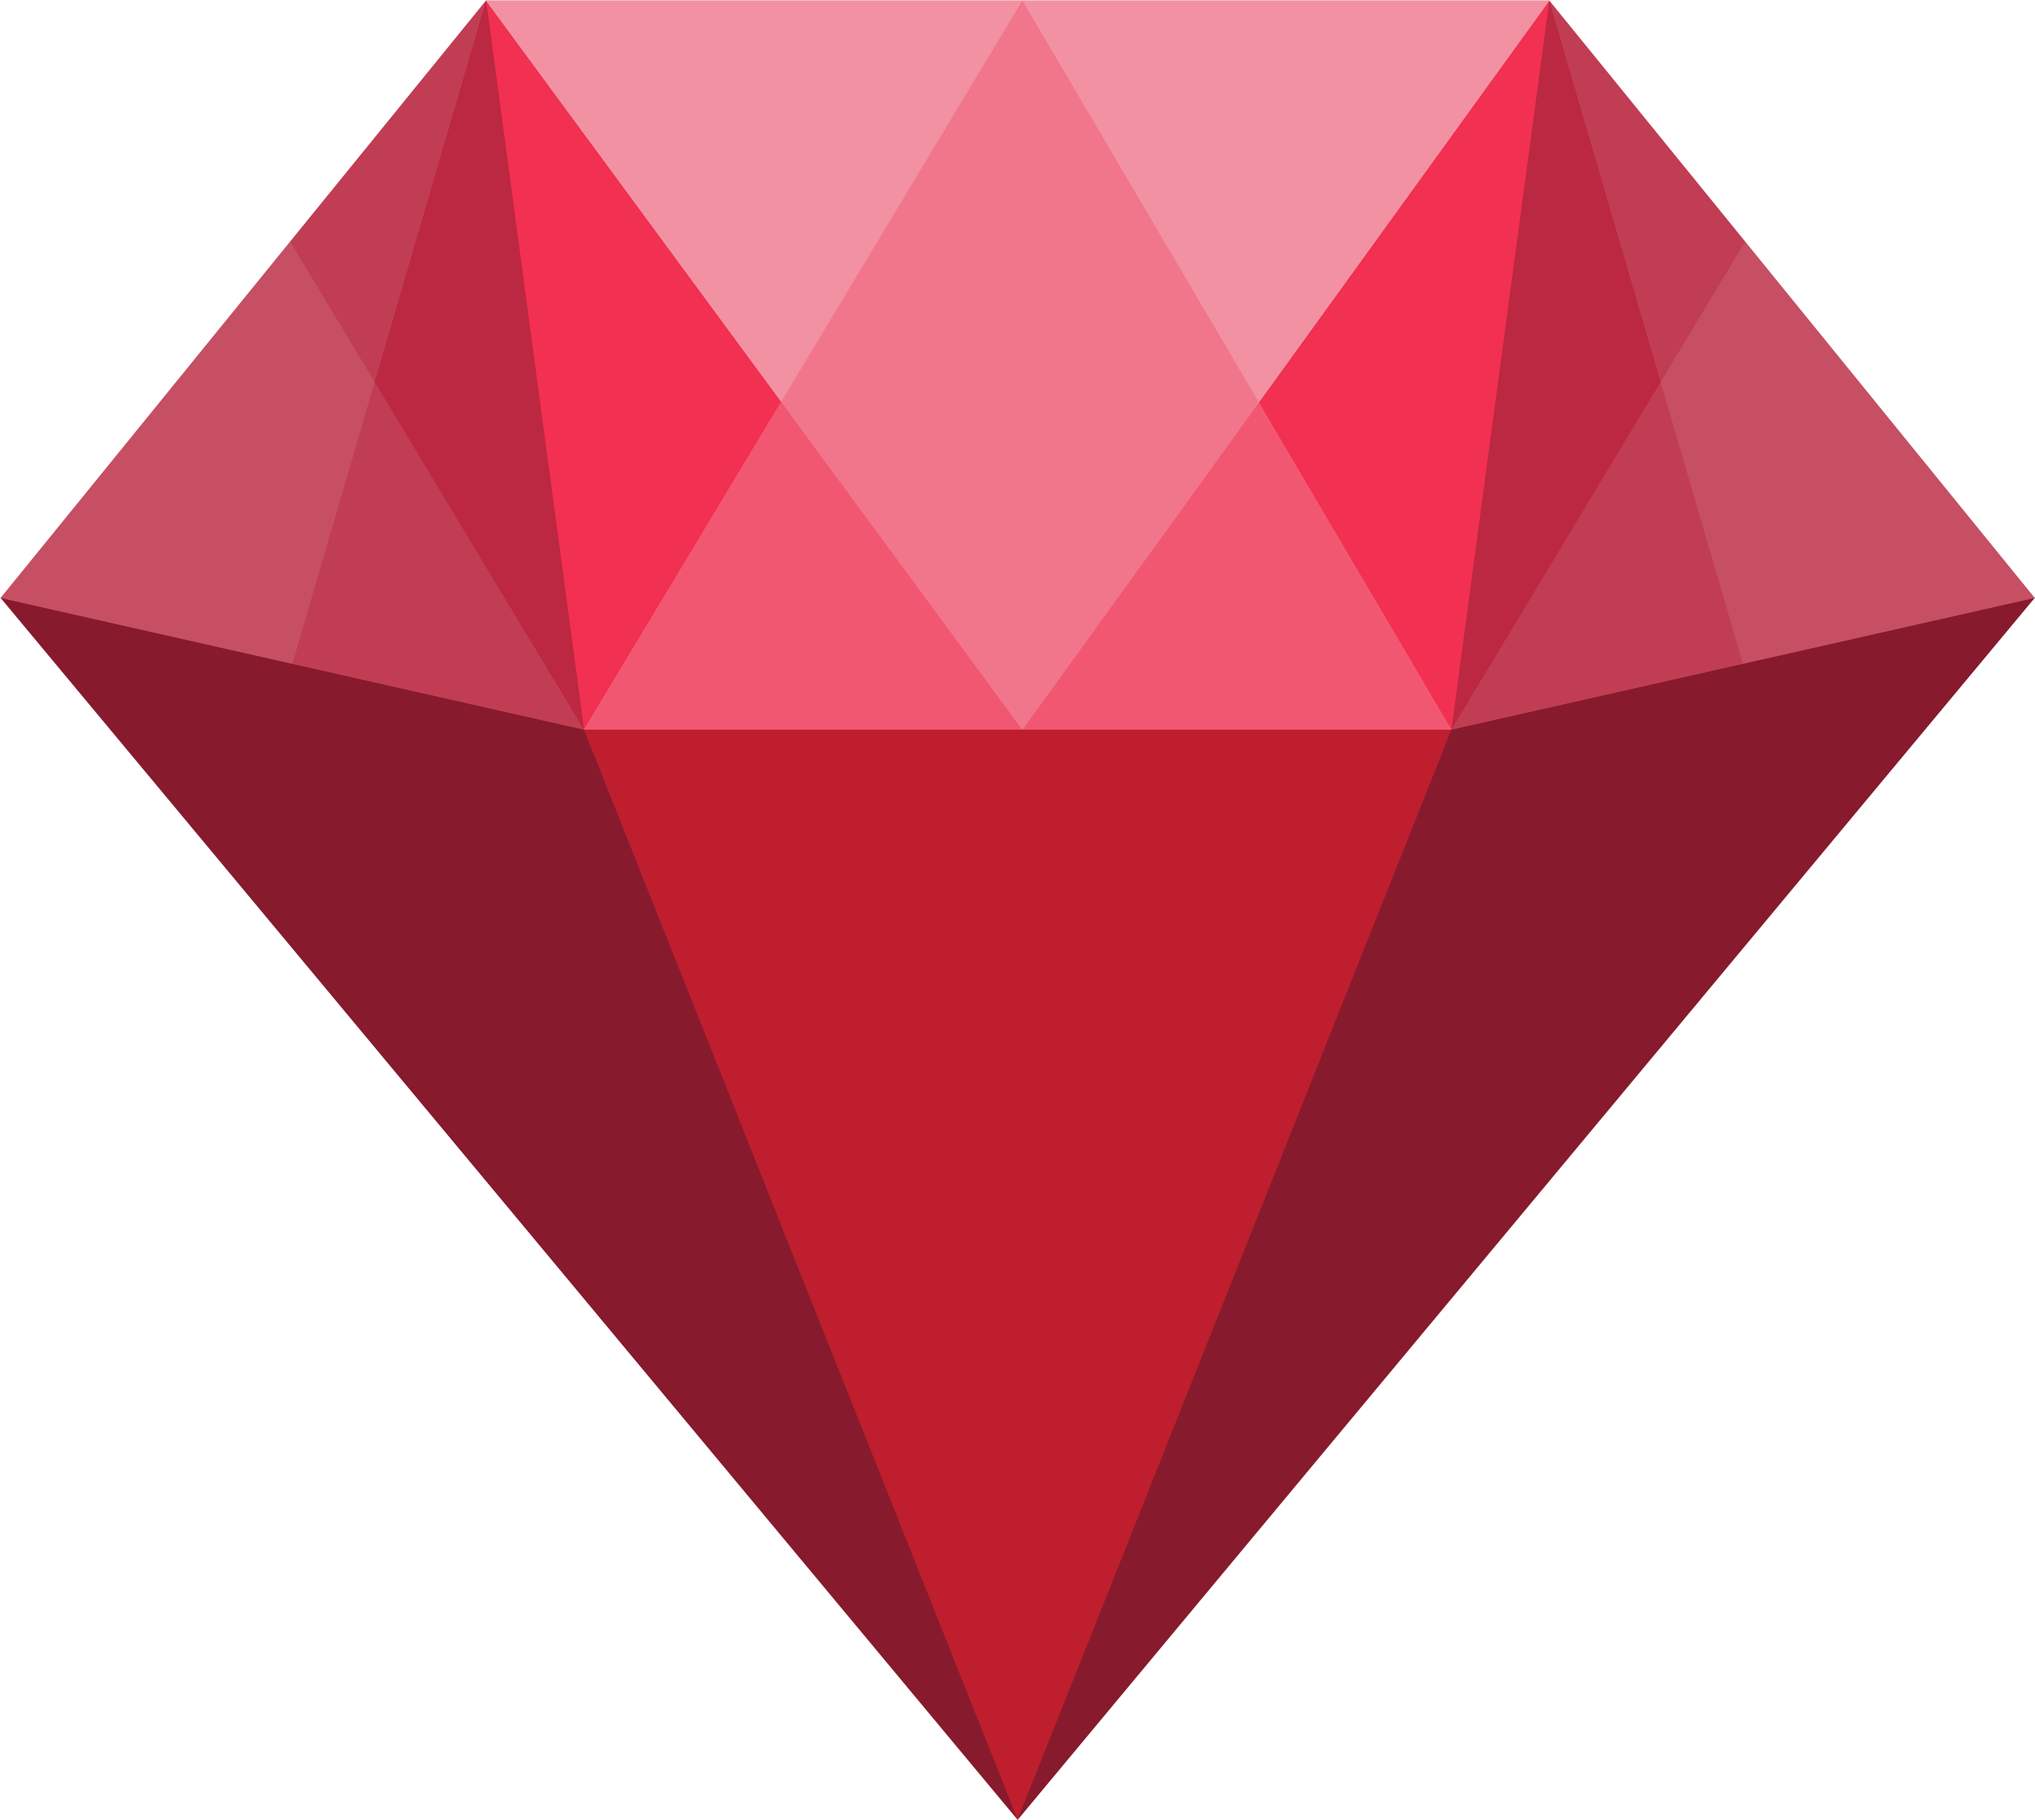 A Red Diamond With Black Background PNG